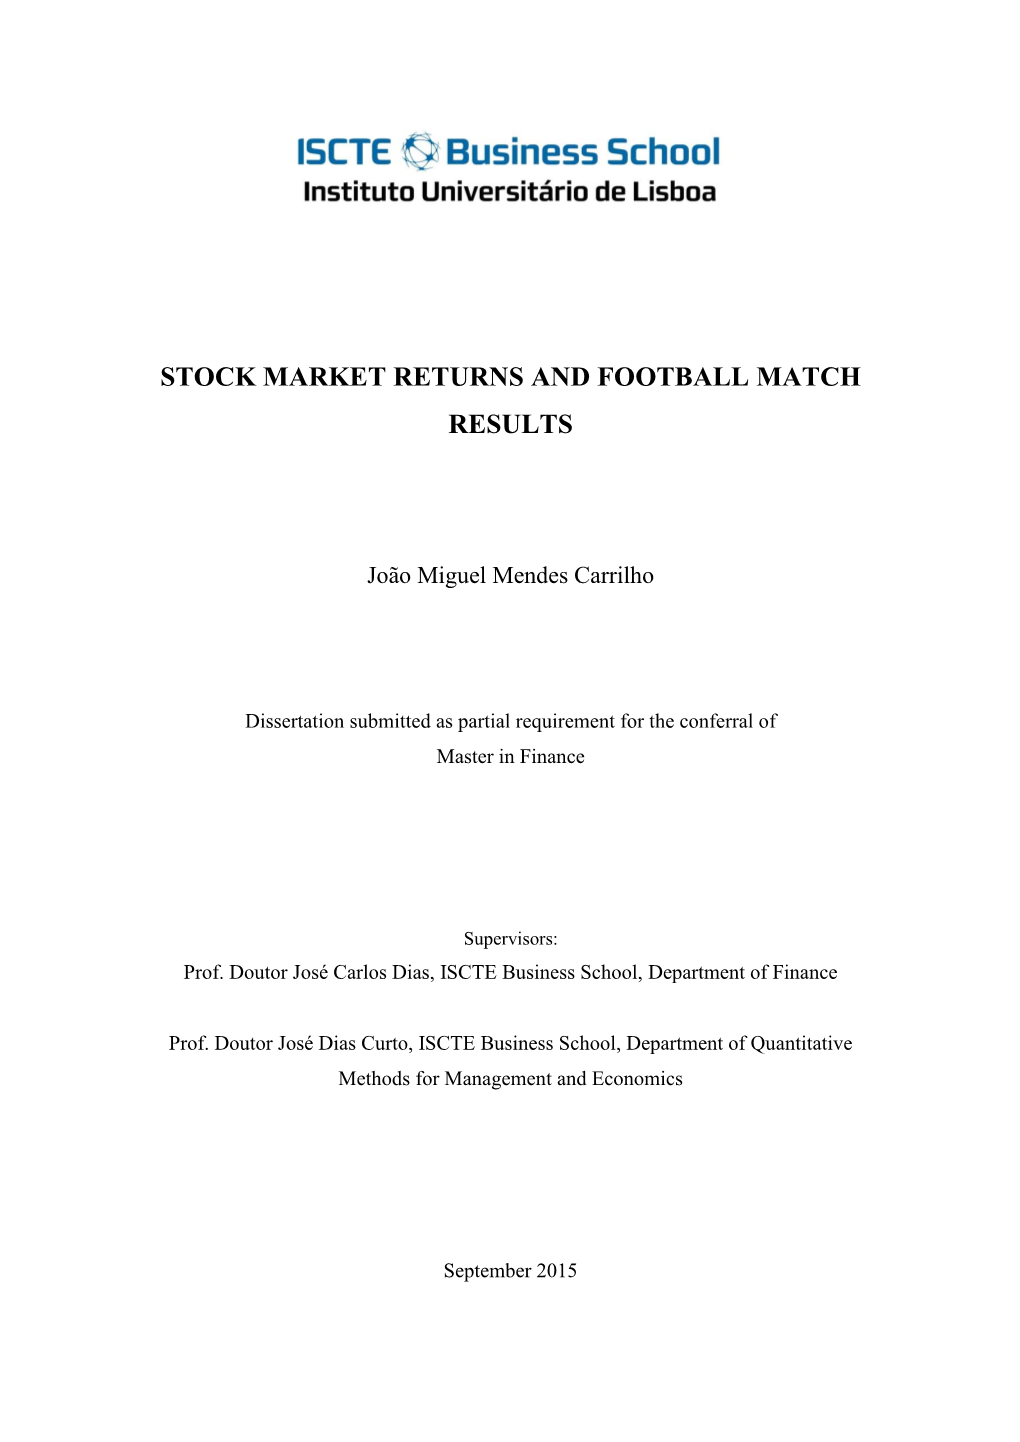 Stock Market Returns and Football Match Results